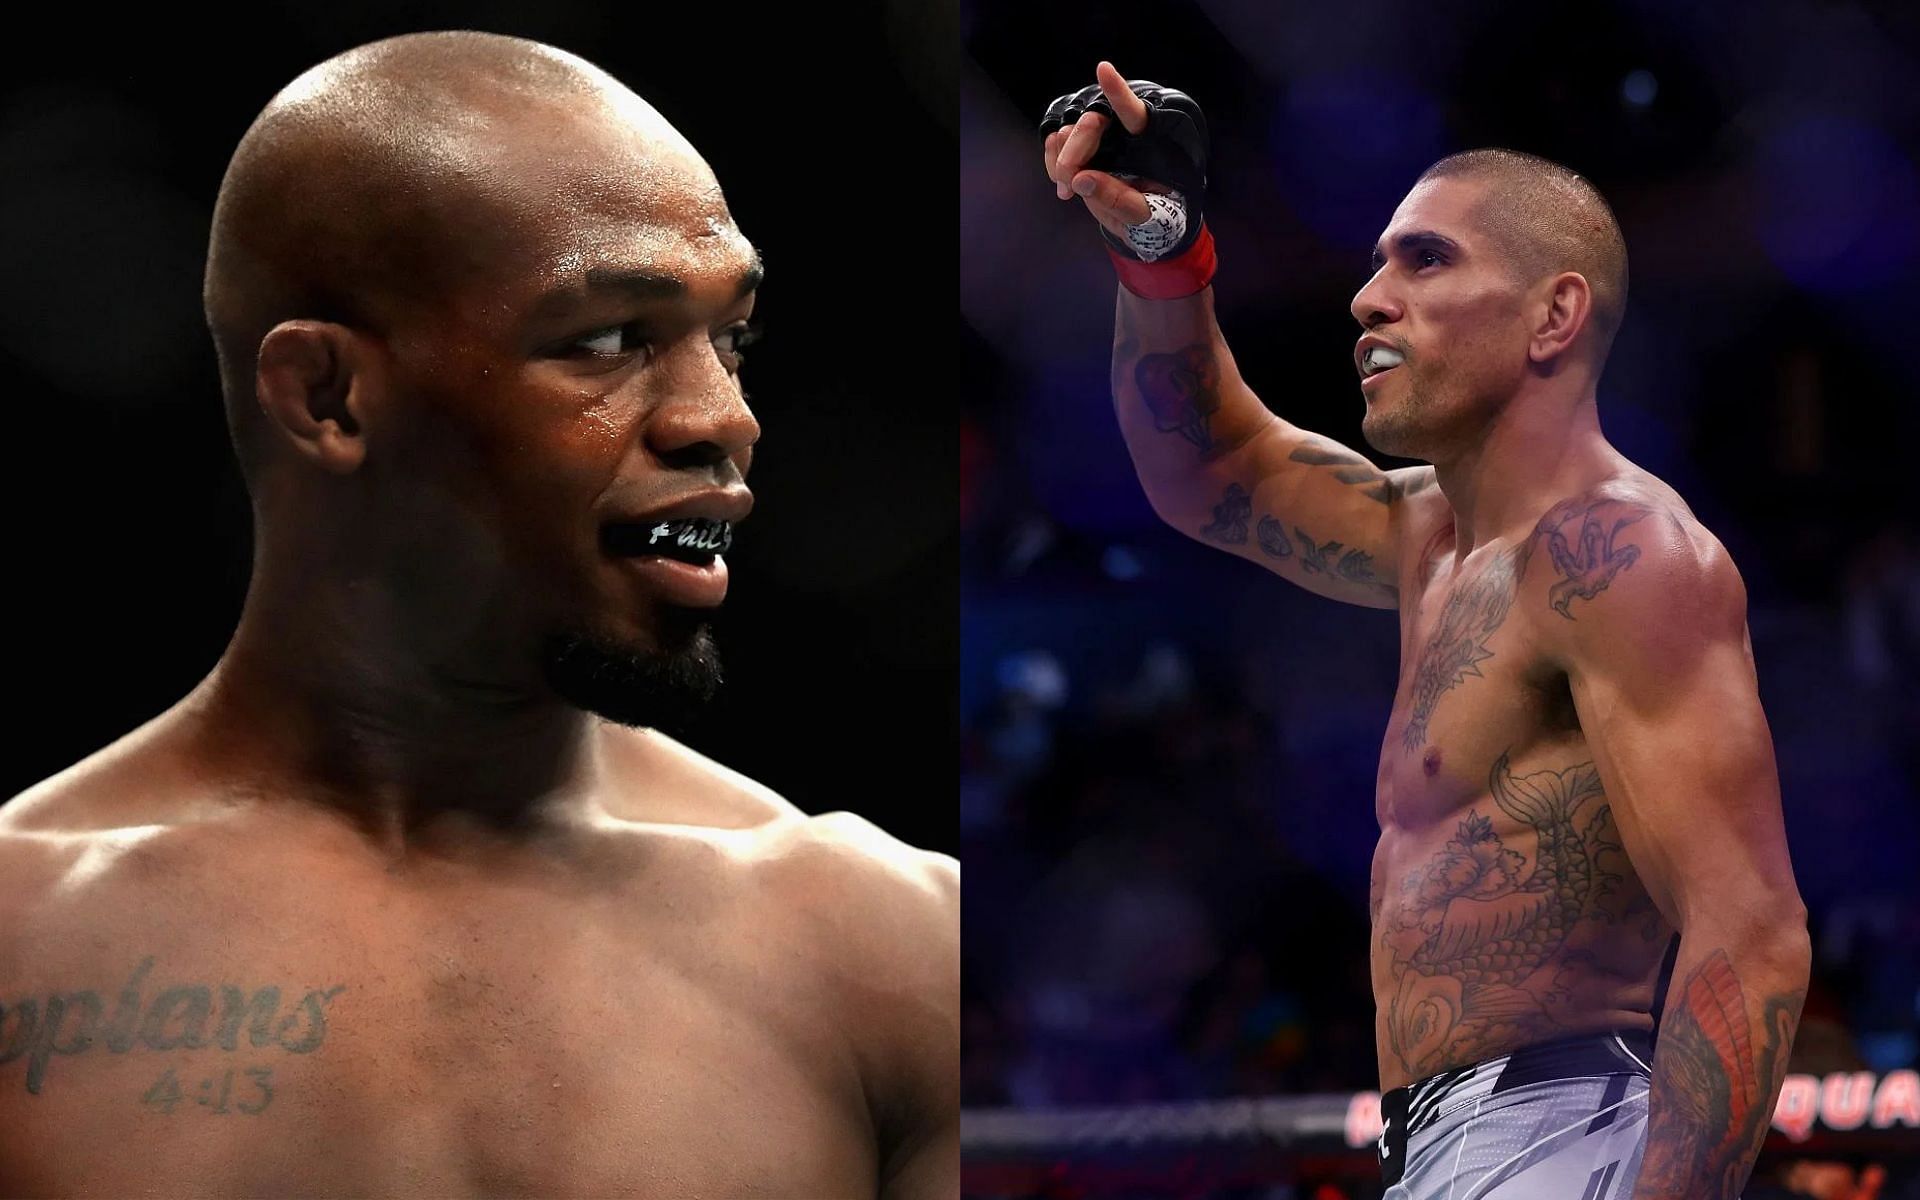 UFC CEO Dana White sheds light on Jon Jones (left) sharing interest in facing Alex Pereira (right) [Images Courtesy: @GettyImages]